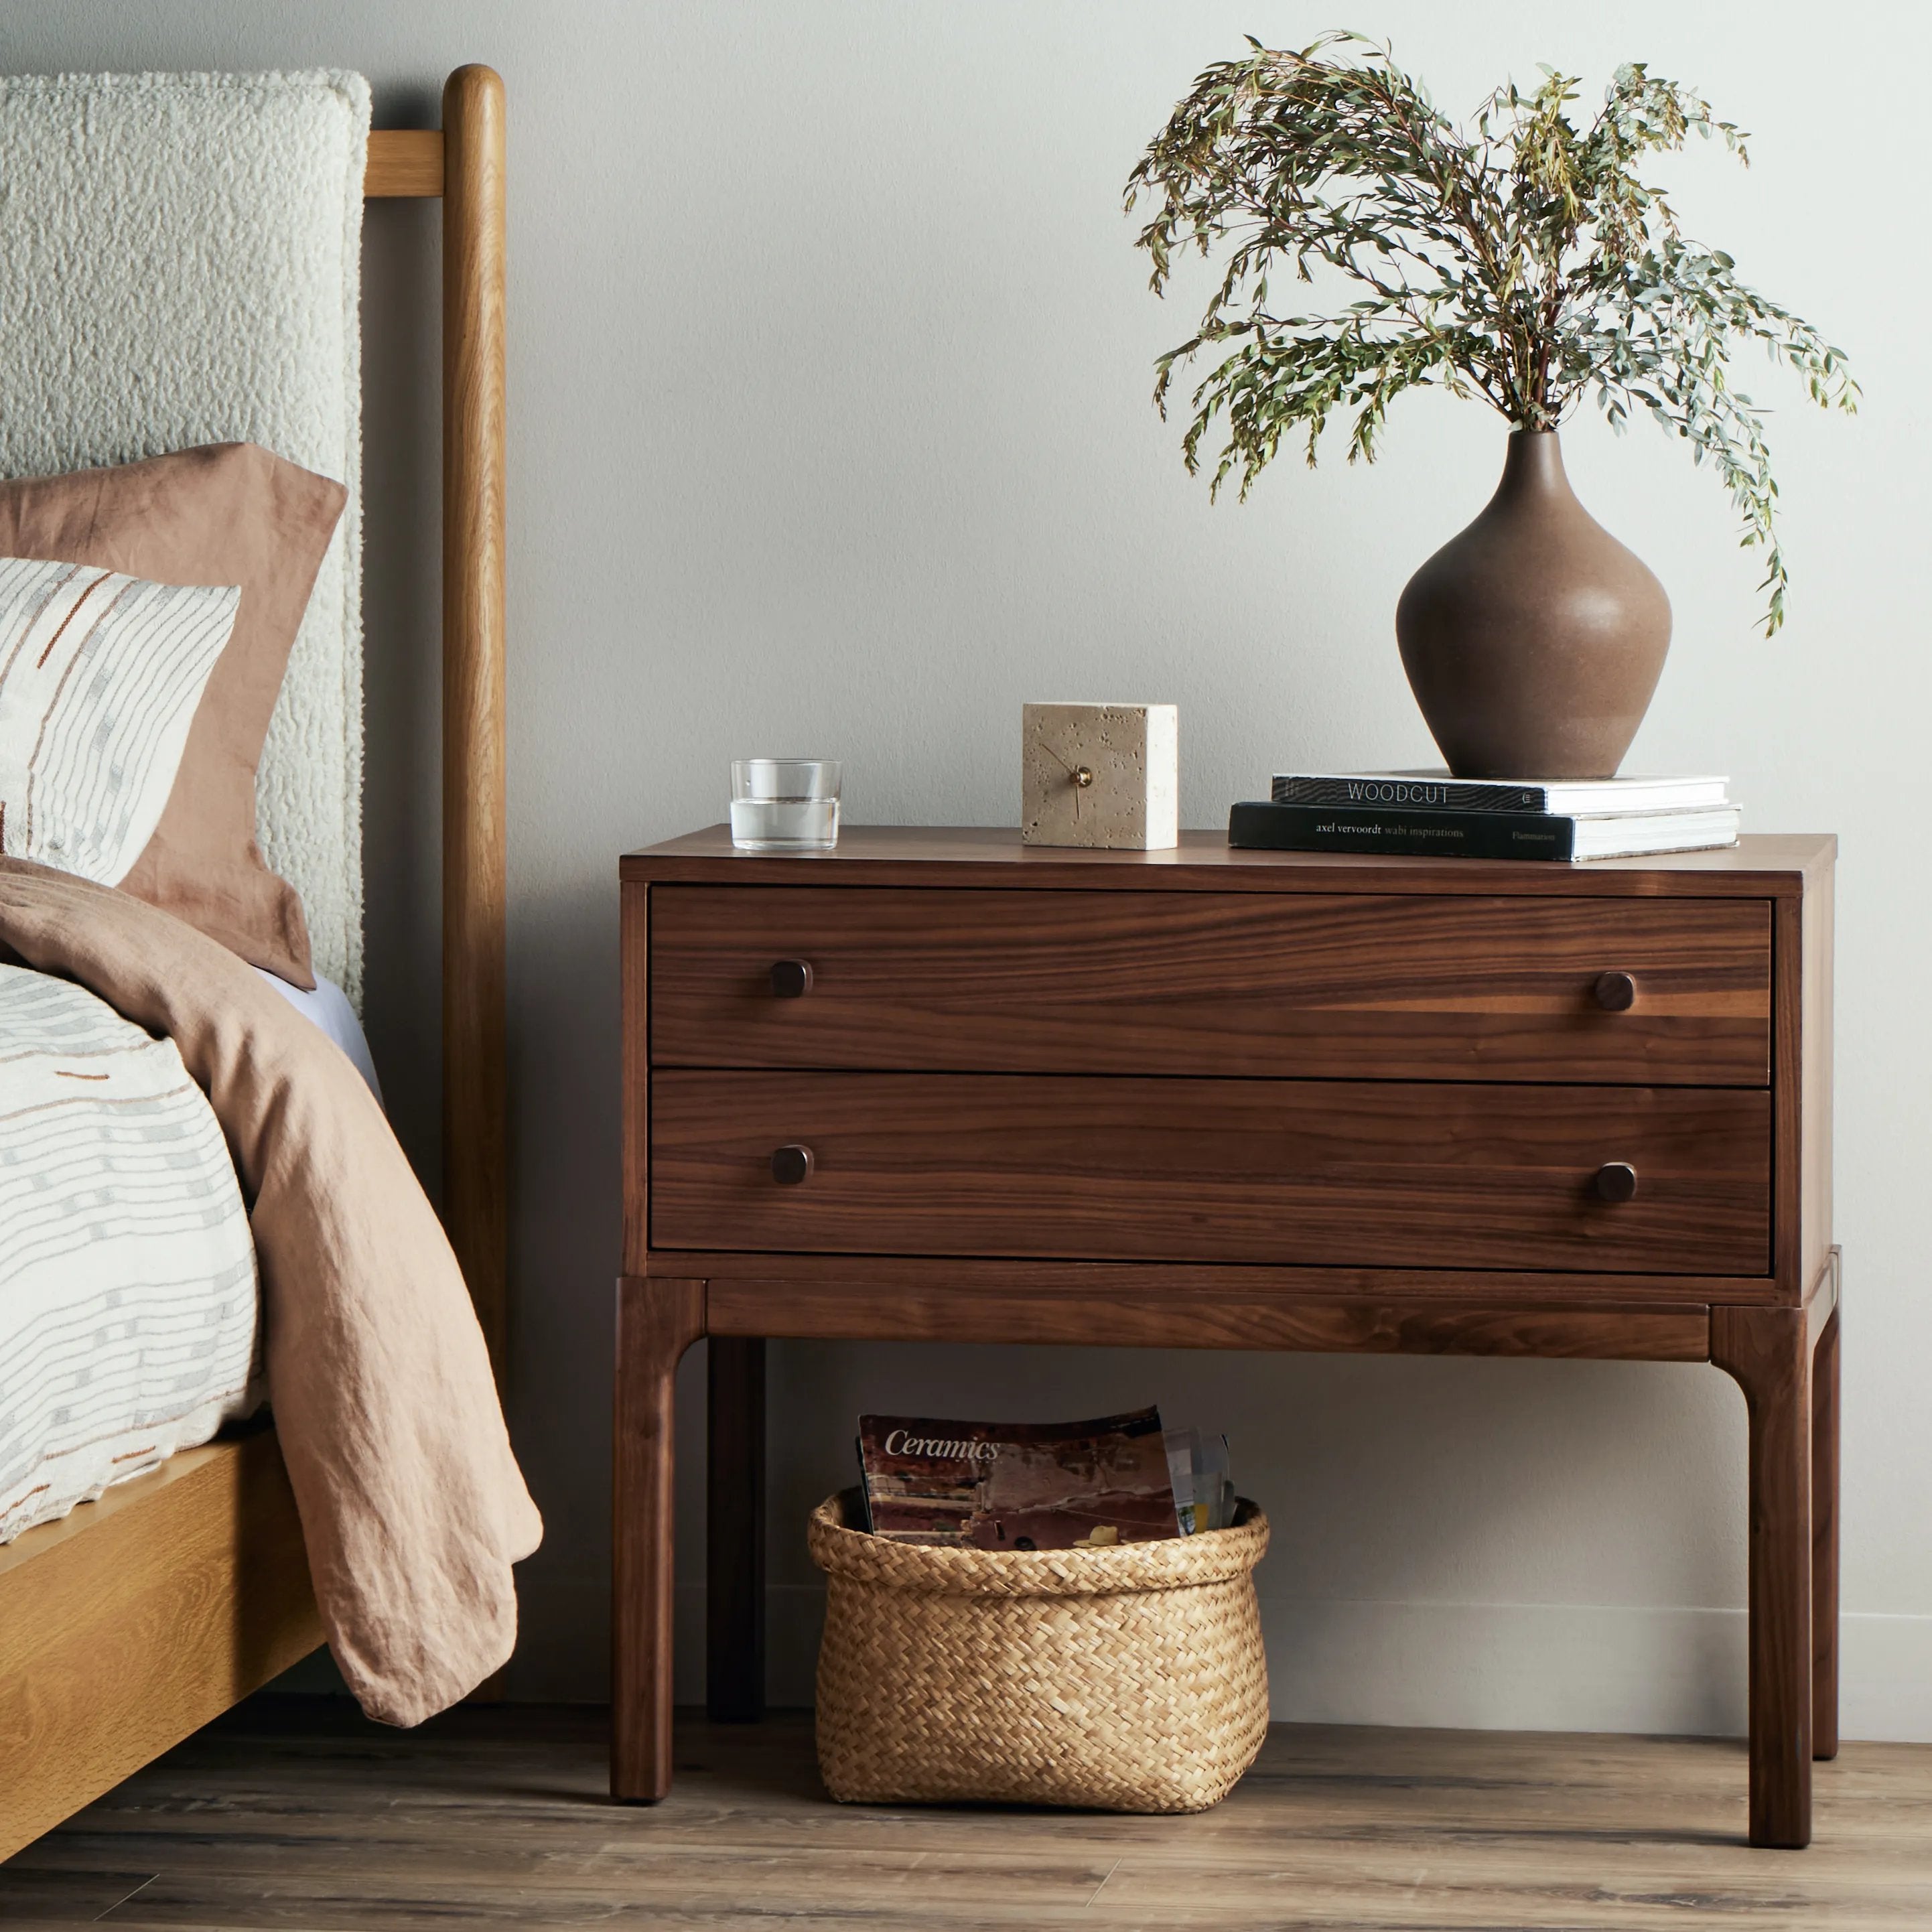 Inspired by campaign-style furniture of the 1800s â€” packable pieces first designed for traveling military use â€” a simply shaped nightstand of natural walnut features a subtly inset top and rounded legs, finished with wooden hardware Amethyst Home provides interior design, new home construction design consulting, vintage area rugs, and lighting in the Winter Garden metro area.